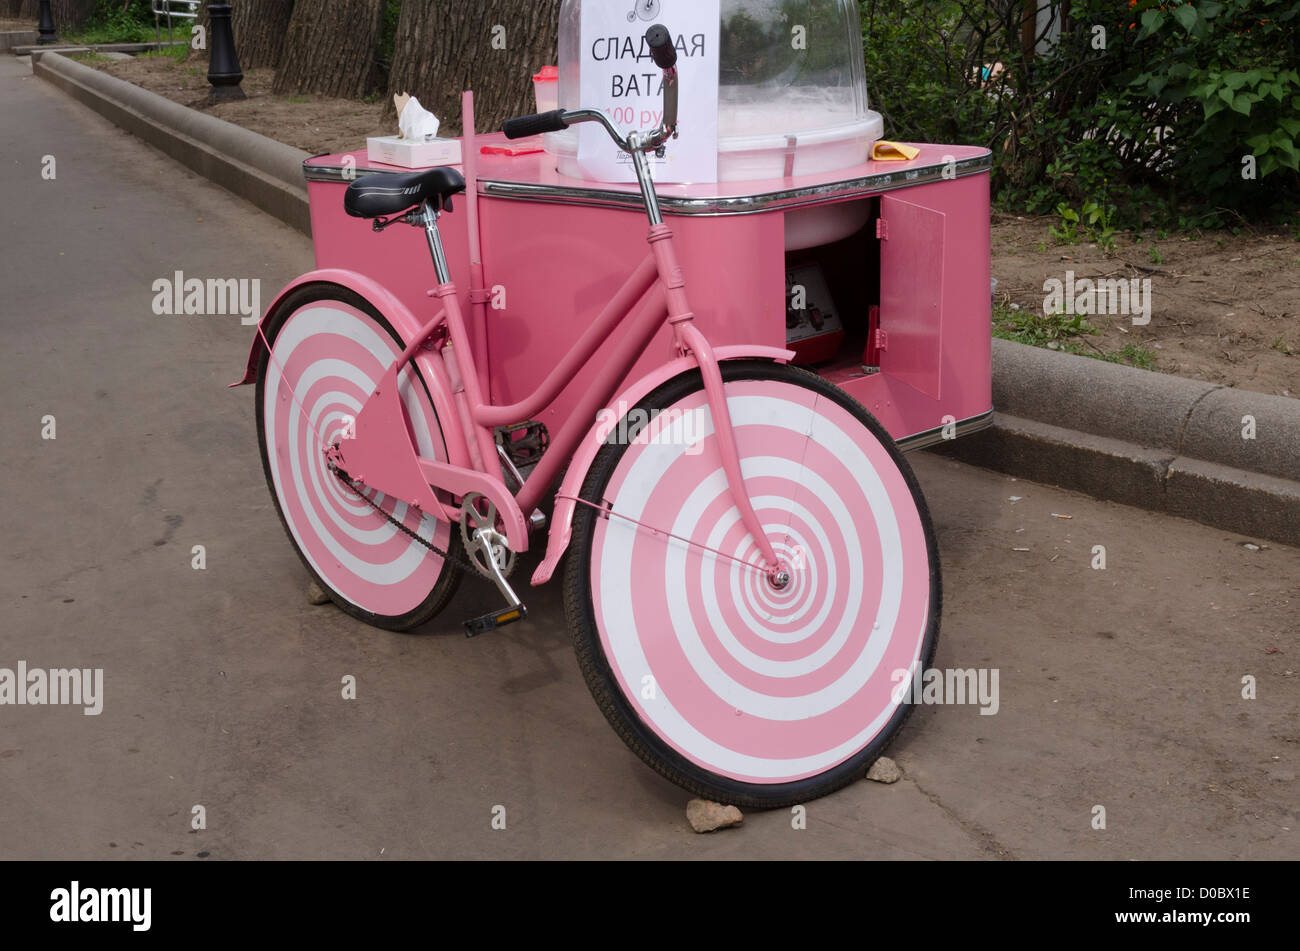 Candy Floss stall on pink bicycle, Gorky Park, Moscow, Russia Stock Photo